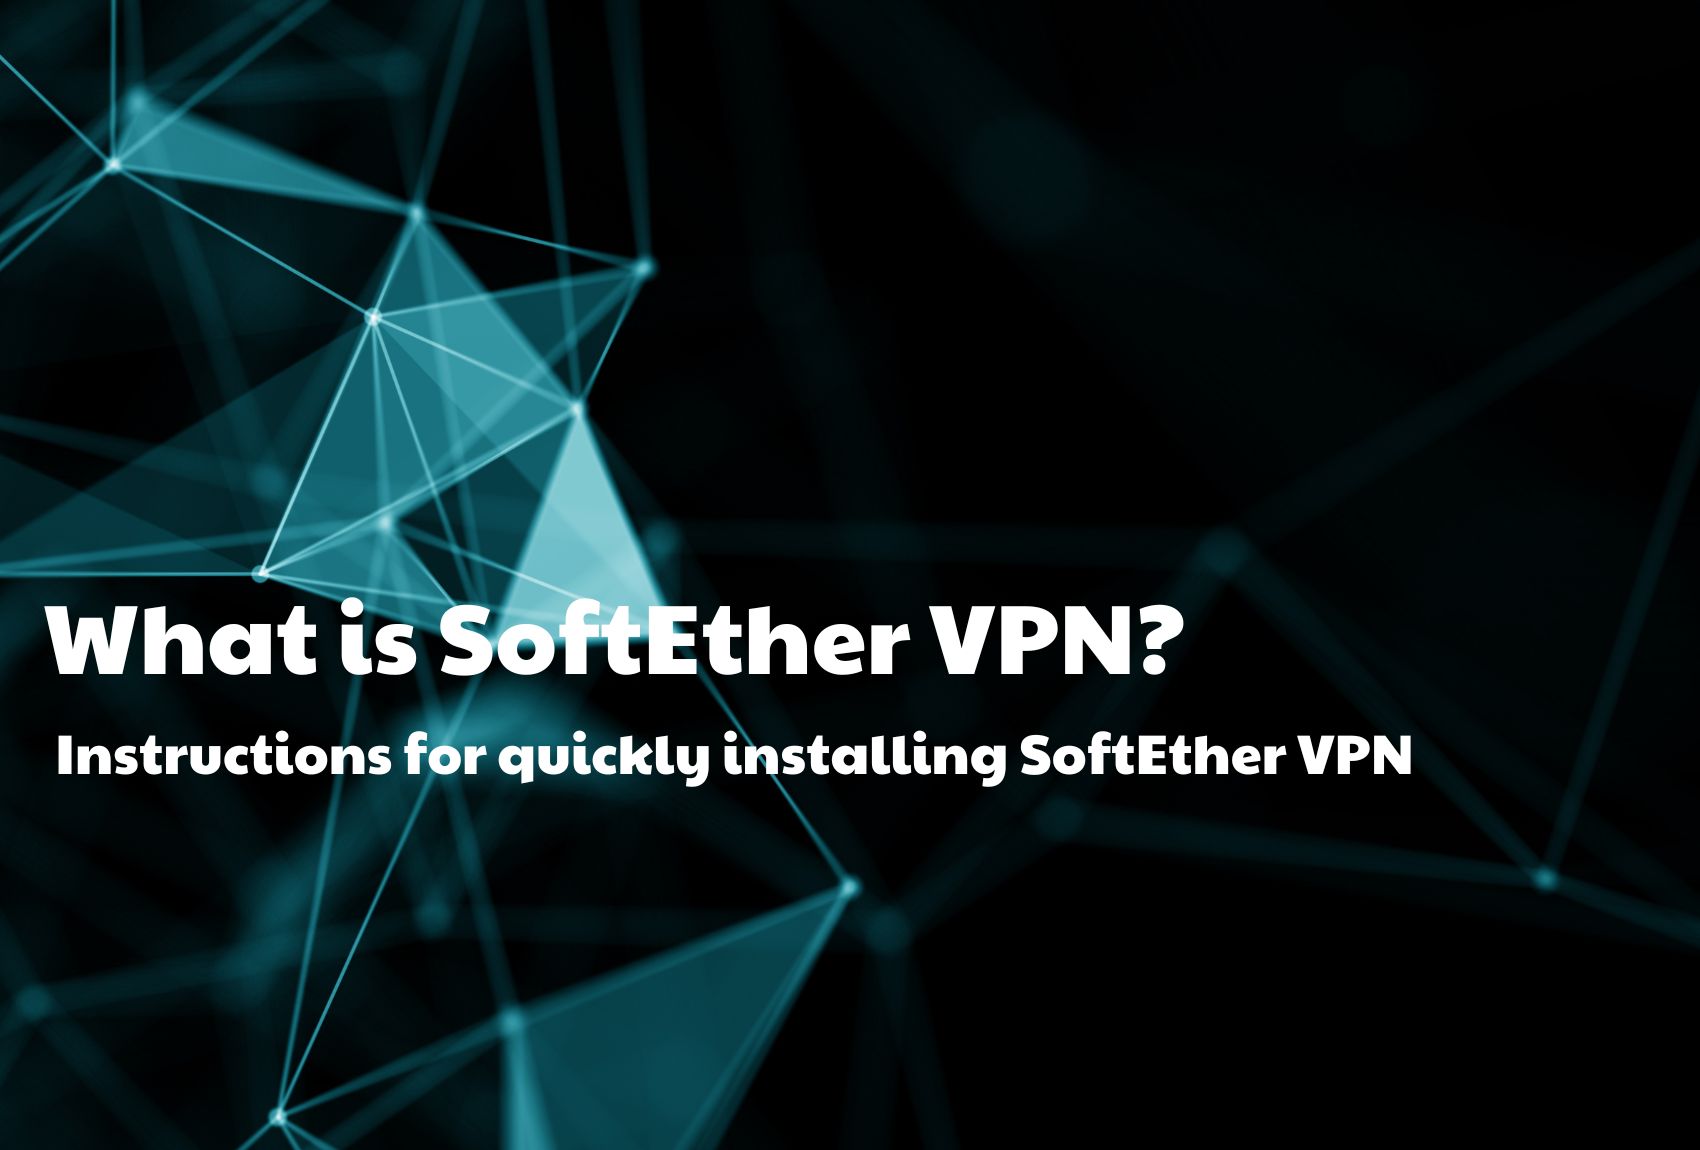 What is SoftEther VPN? Instructions for quickly installing SoftEther VPN